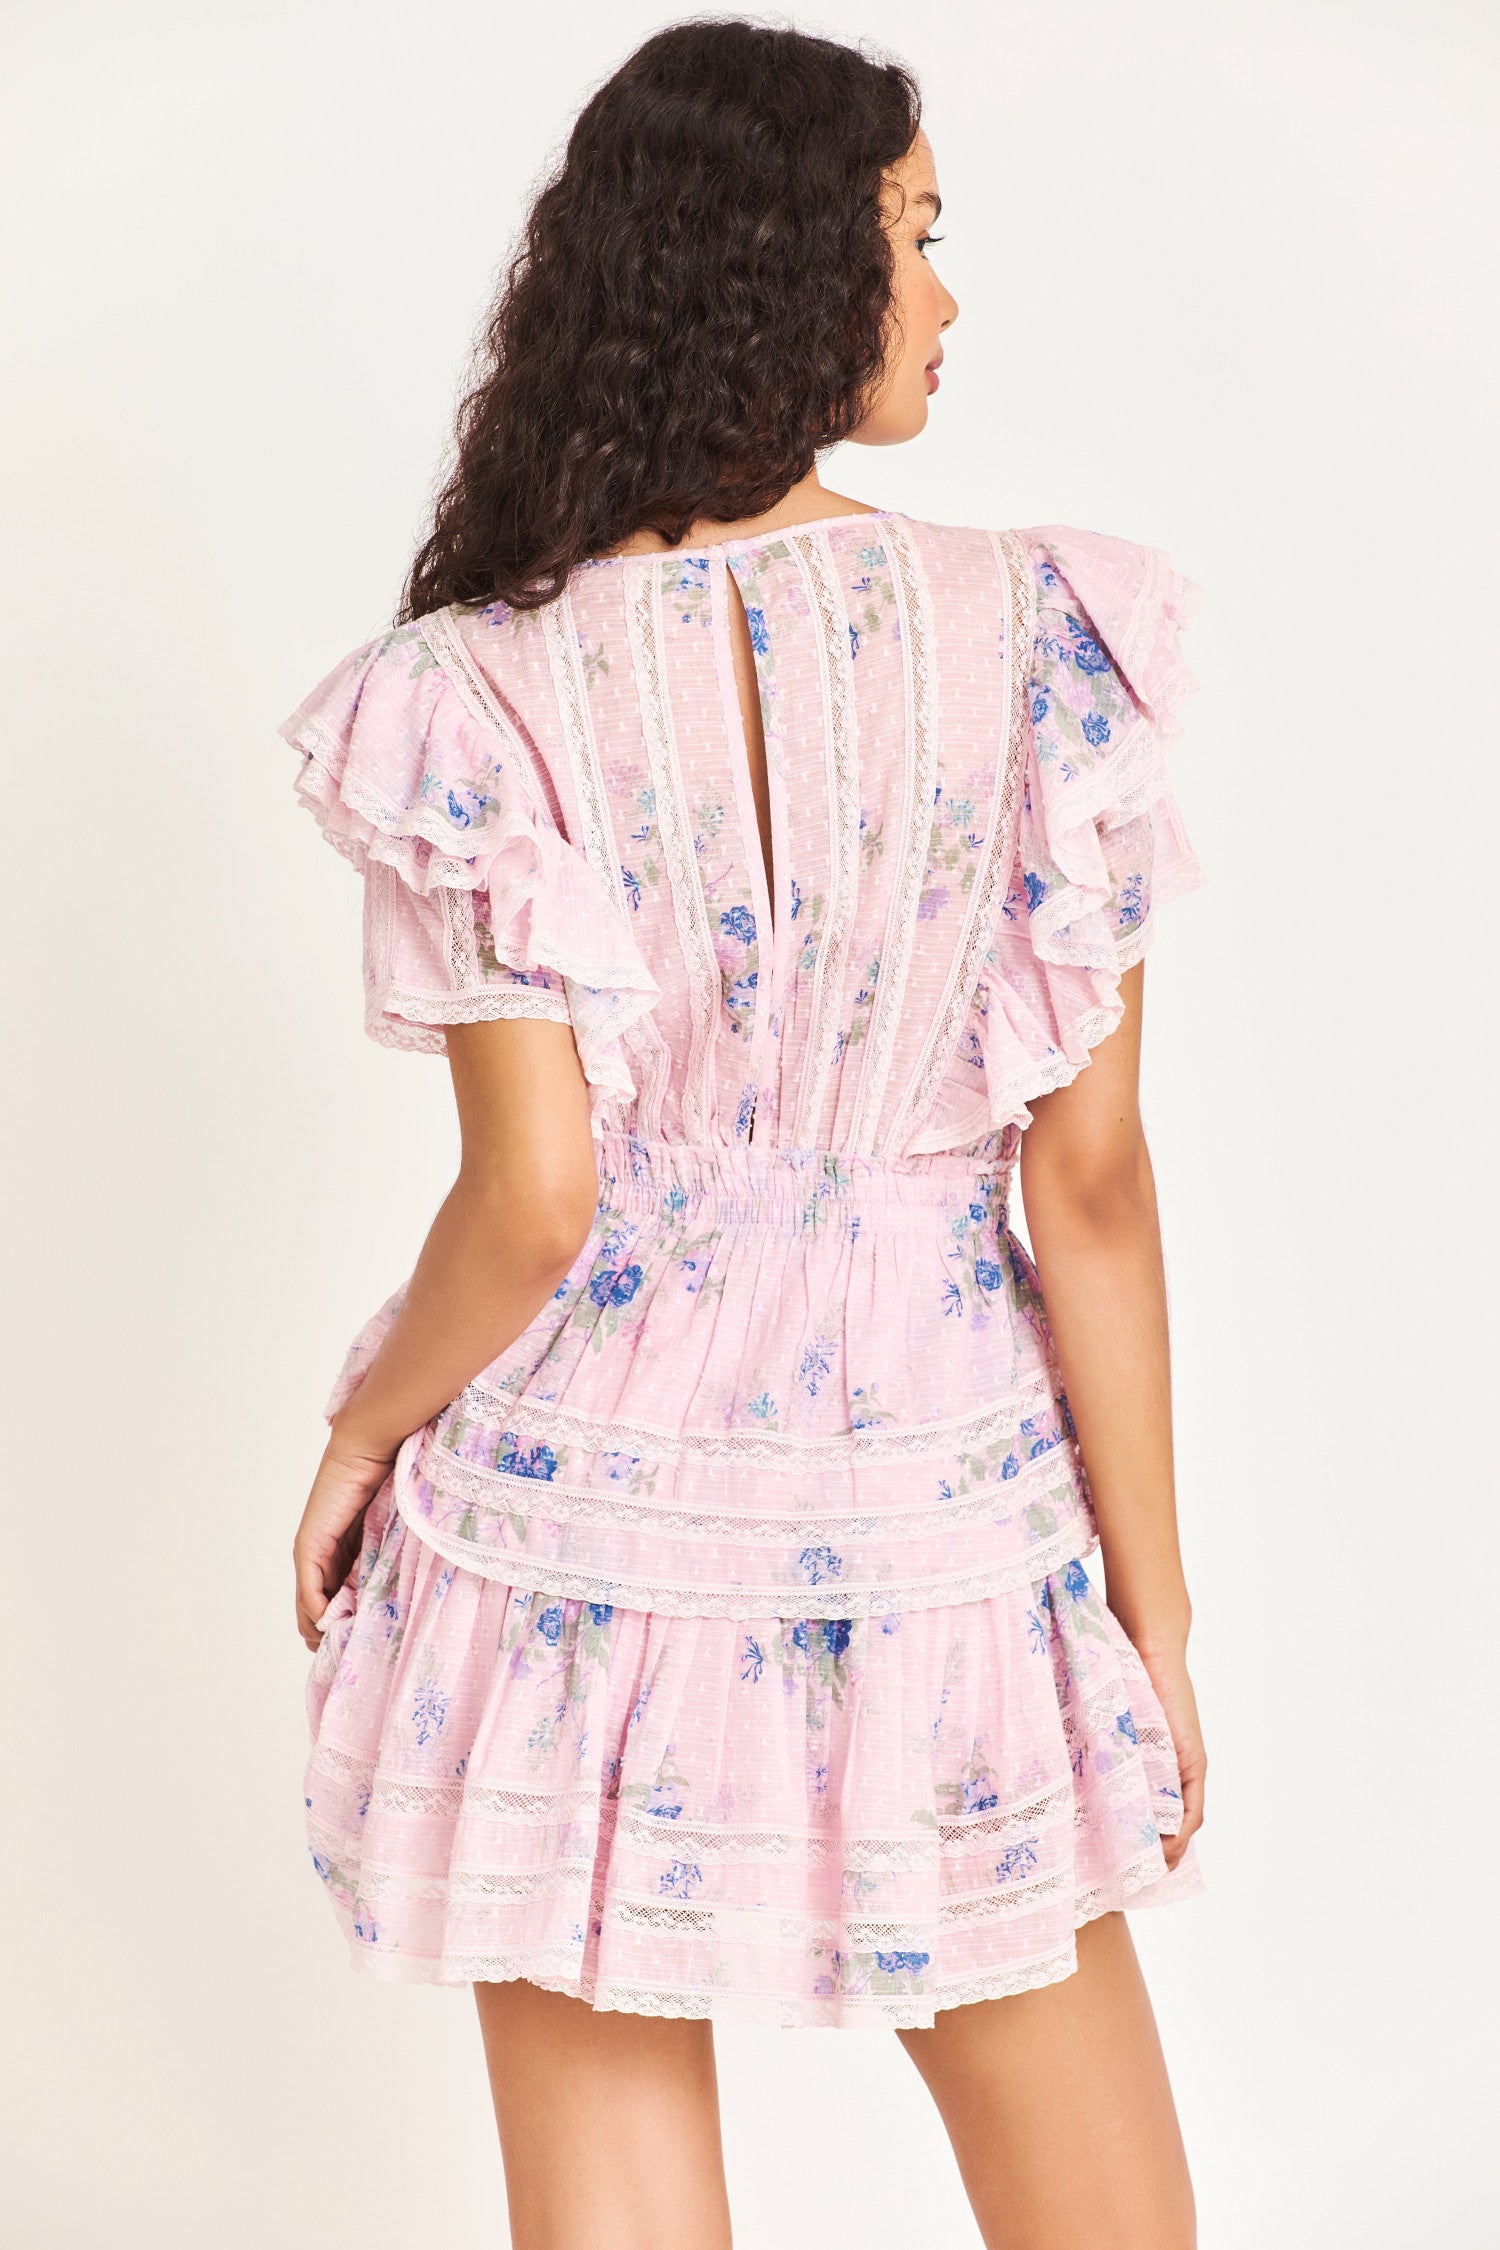 The Natasha dress in pink features double ruffled flutter sleeves, an elasticated waist, and custom lace panels at the trim of the skirt. The dress also features small blue flower prints throughout the dress. 